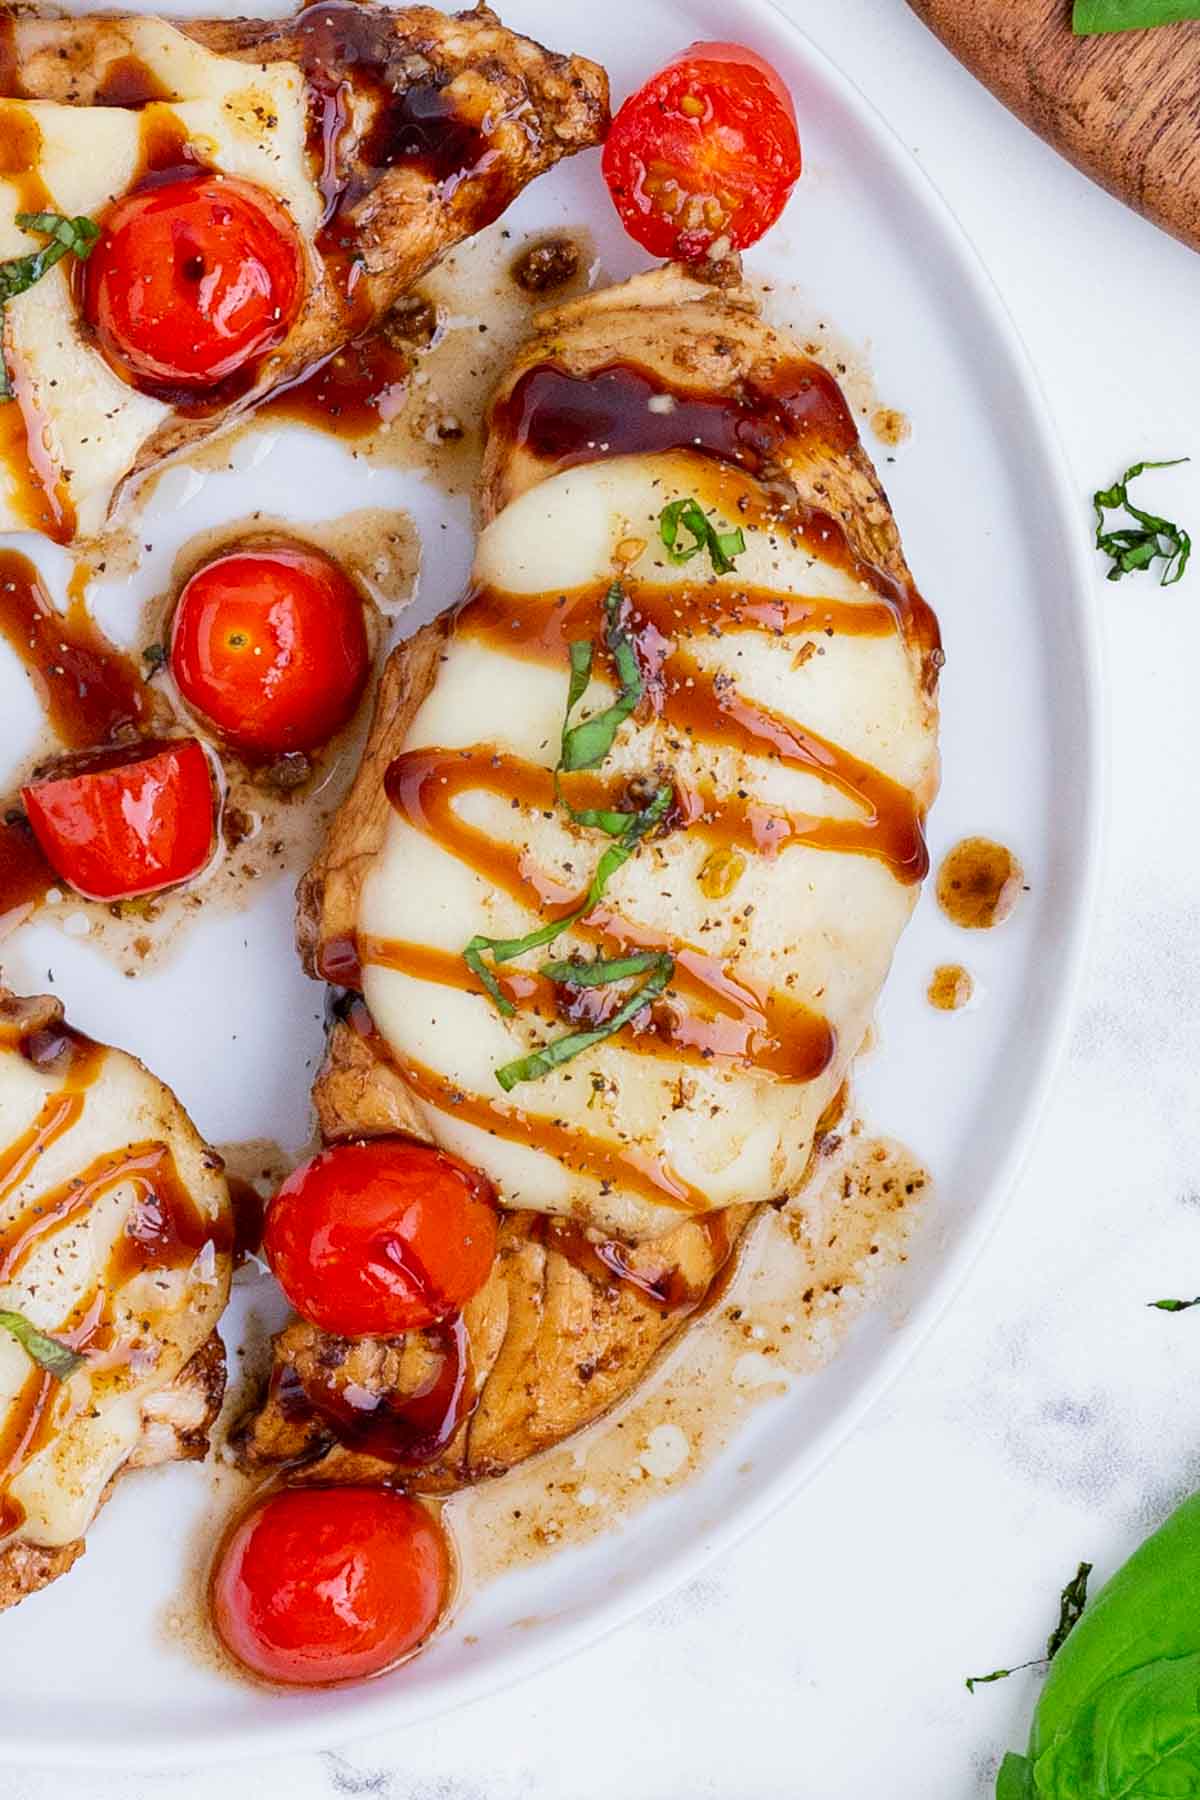 Caprese chicken is made with mozzarella cheese, tomatoes, and basil, then topped with a drizzle of balsamic.